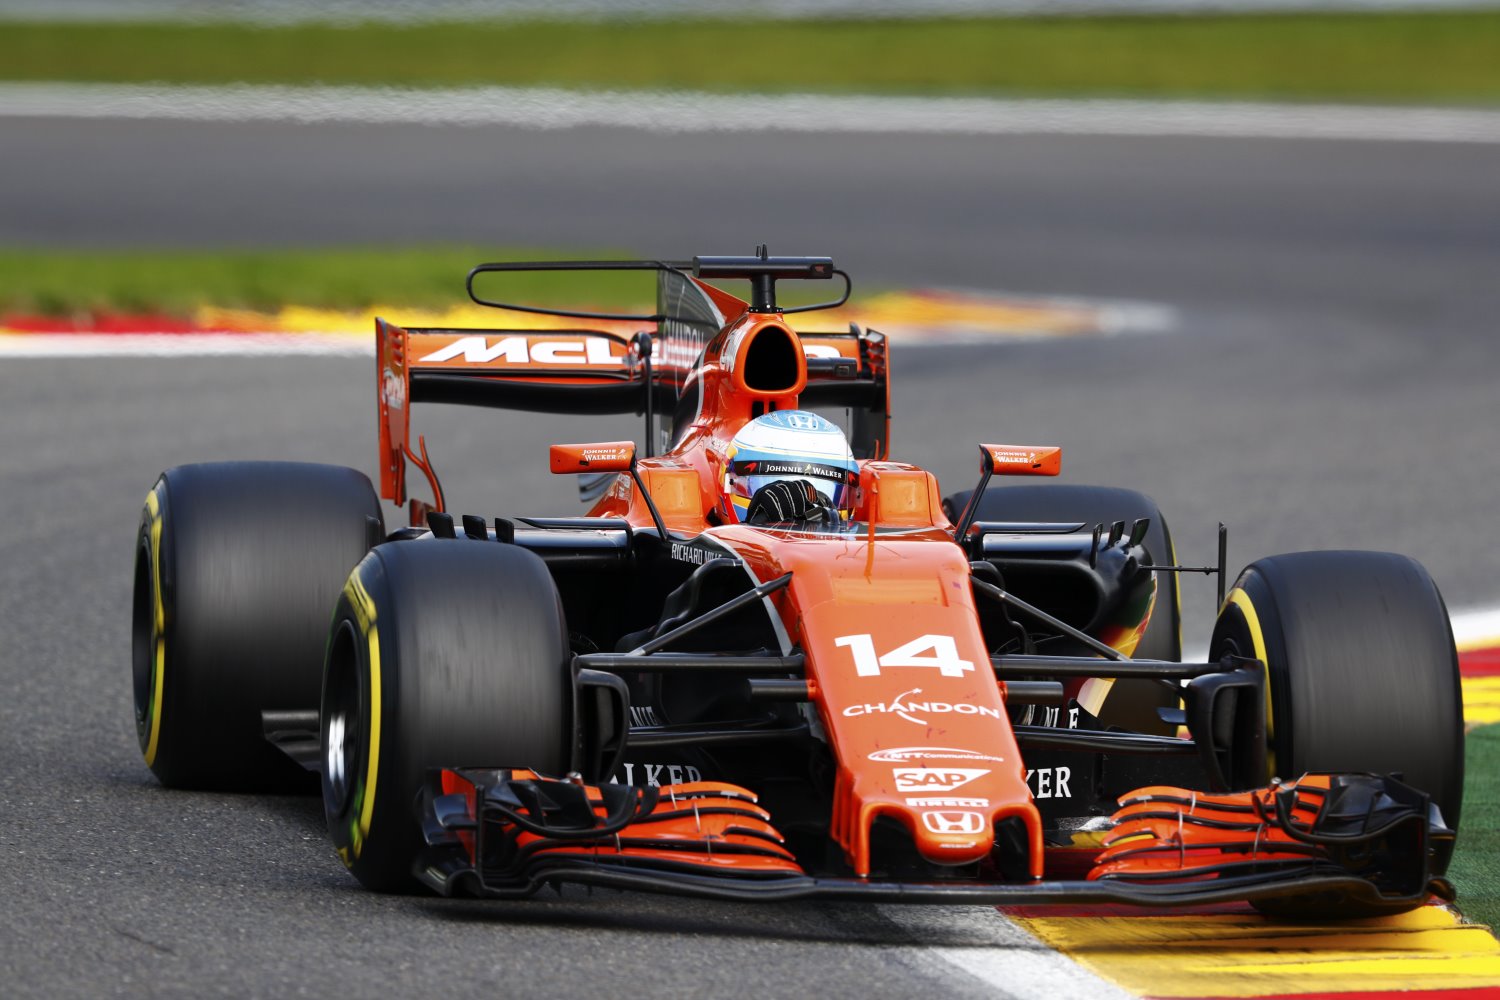 Right now McLaren would be faster with a Renault, but dropping Honda is a terrible mistake